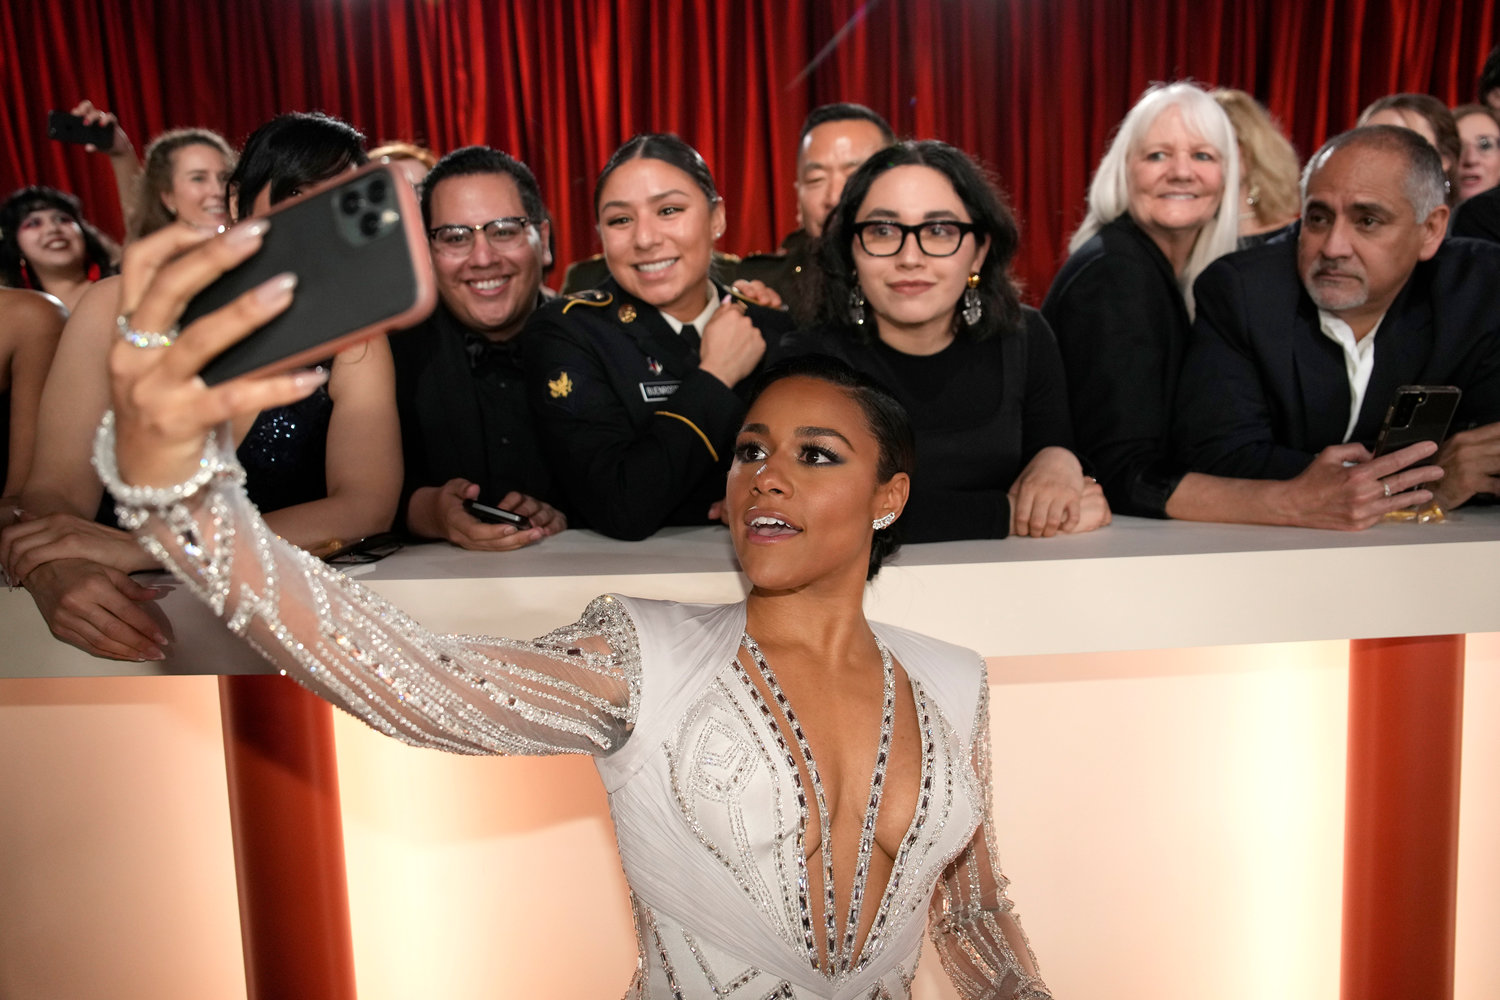 Ariana DeBose takes a selfie with fans on carpet at the Oscars on Sunday, March 12, 2023, at the Dolby Theatre in Los Angeles. (AP Photo/John Locher)